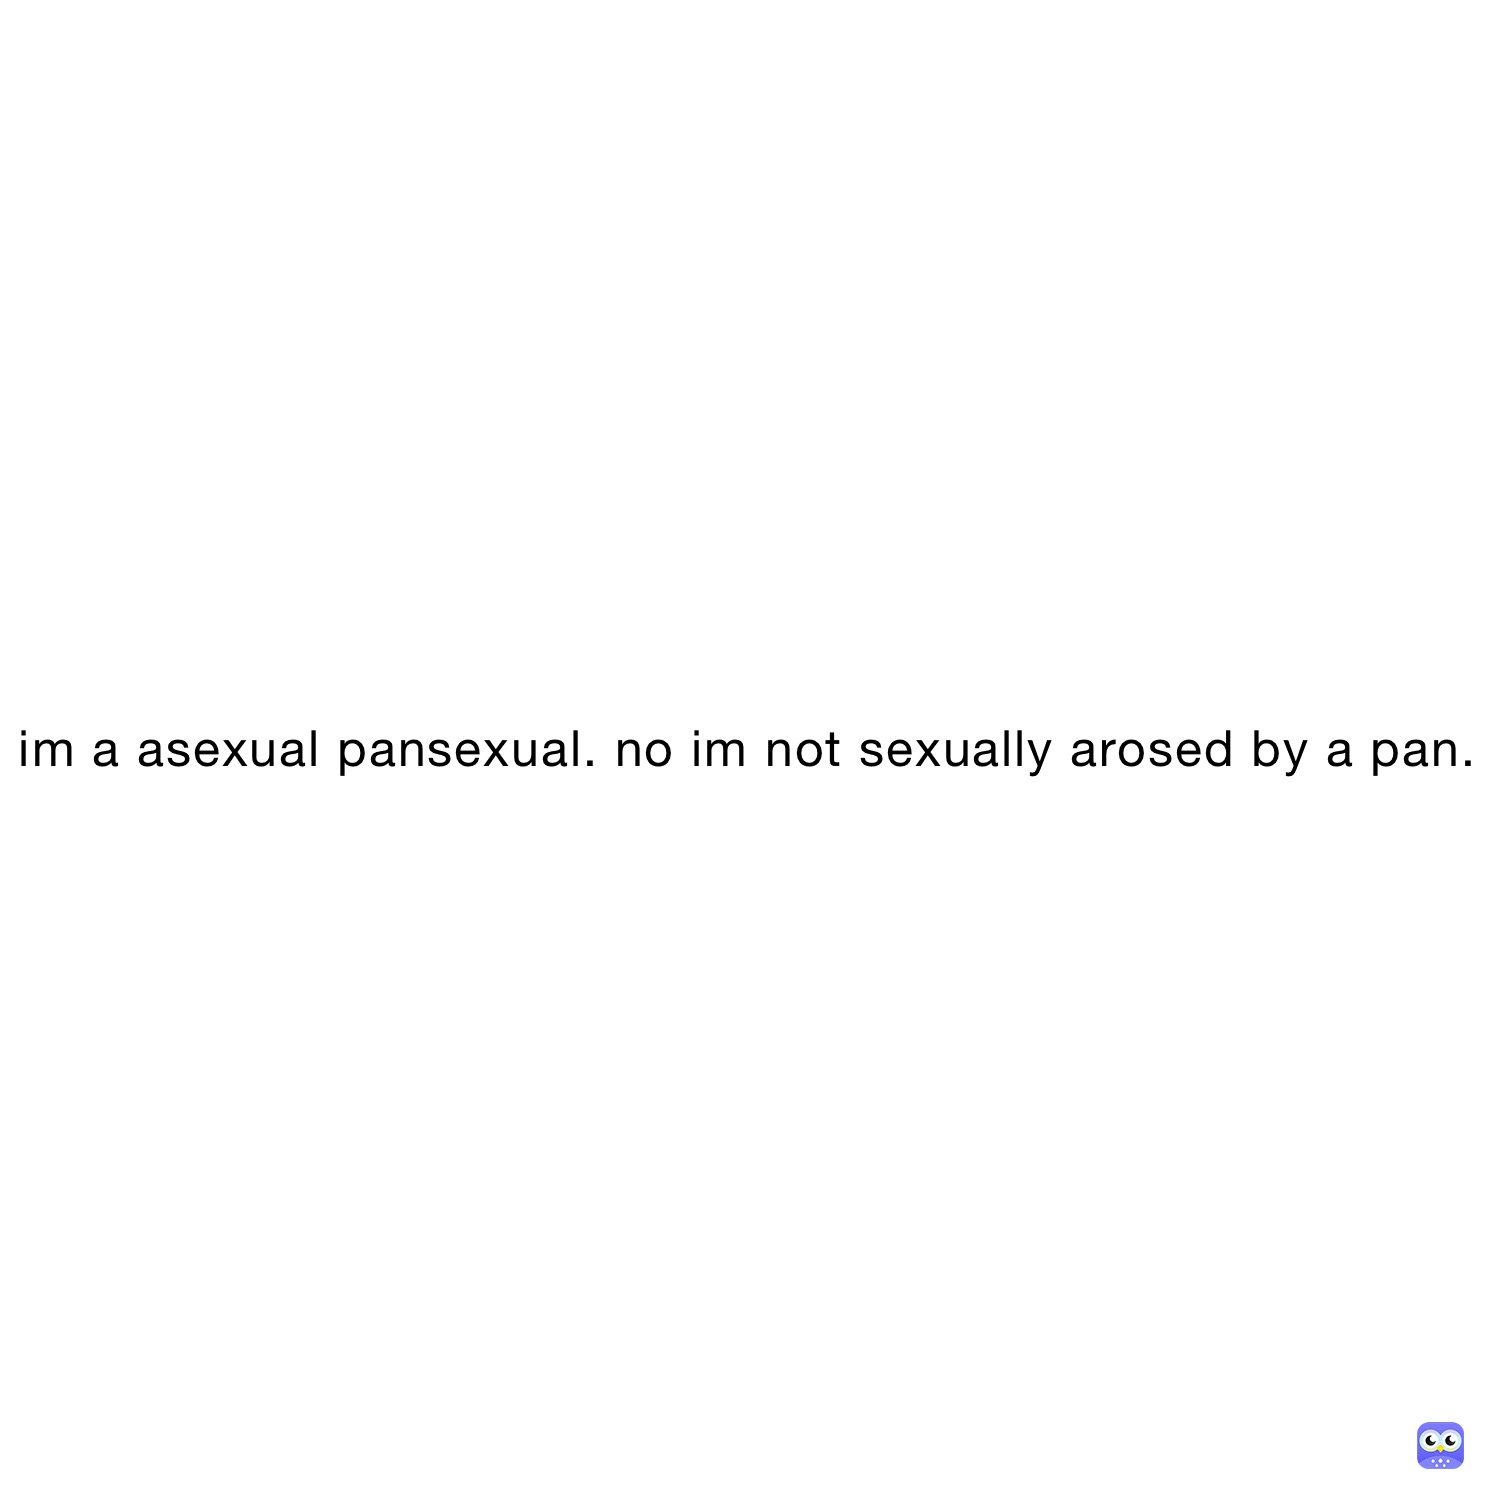 im a asexual pansexual. no im not sexually arosed by a pan.